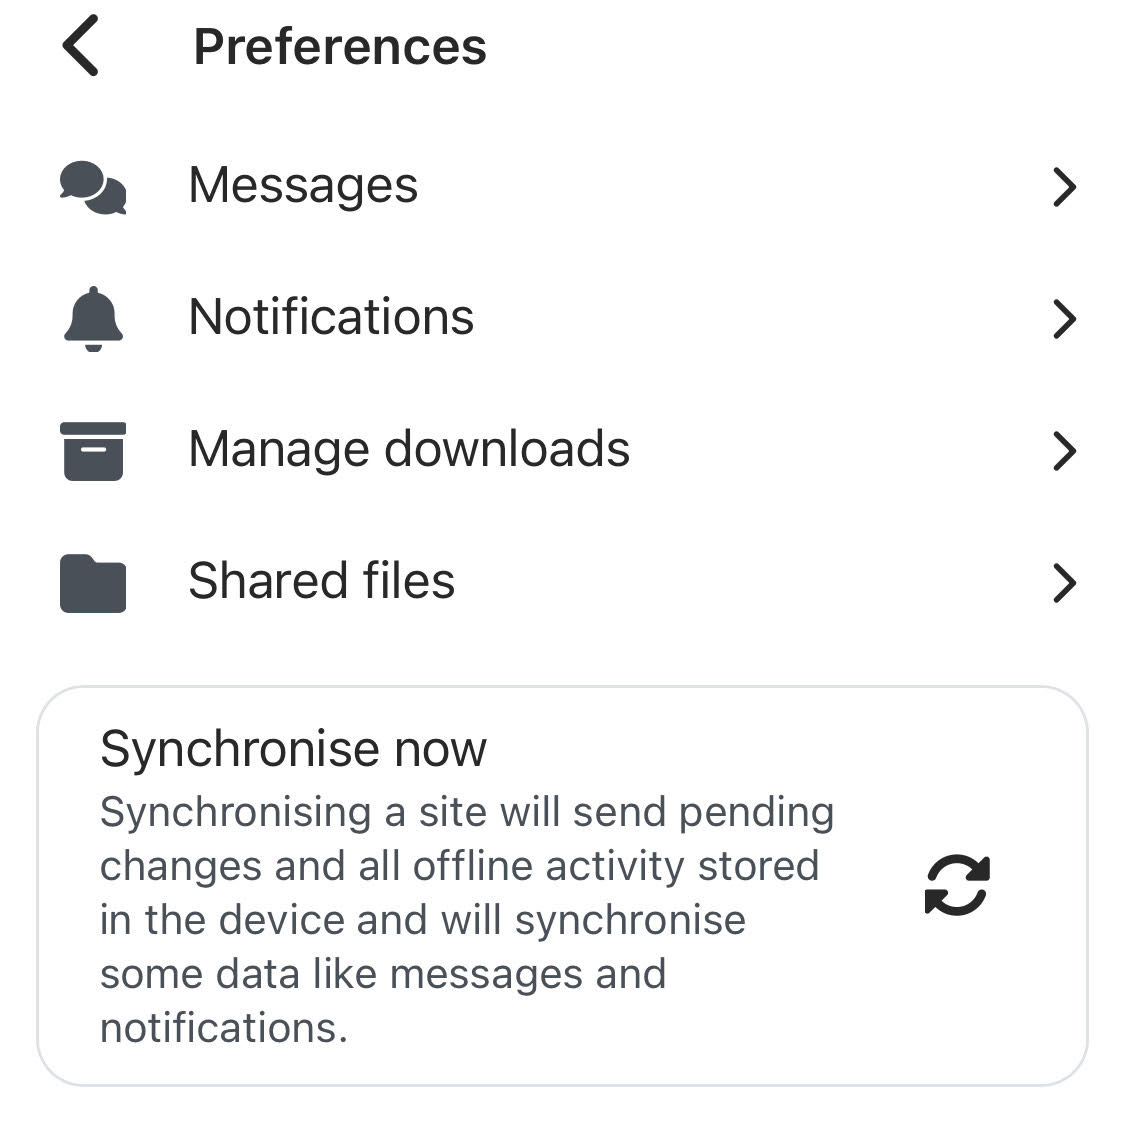 Synchronise now option under Preferences in Profile on the Moodle app.